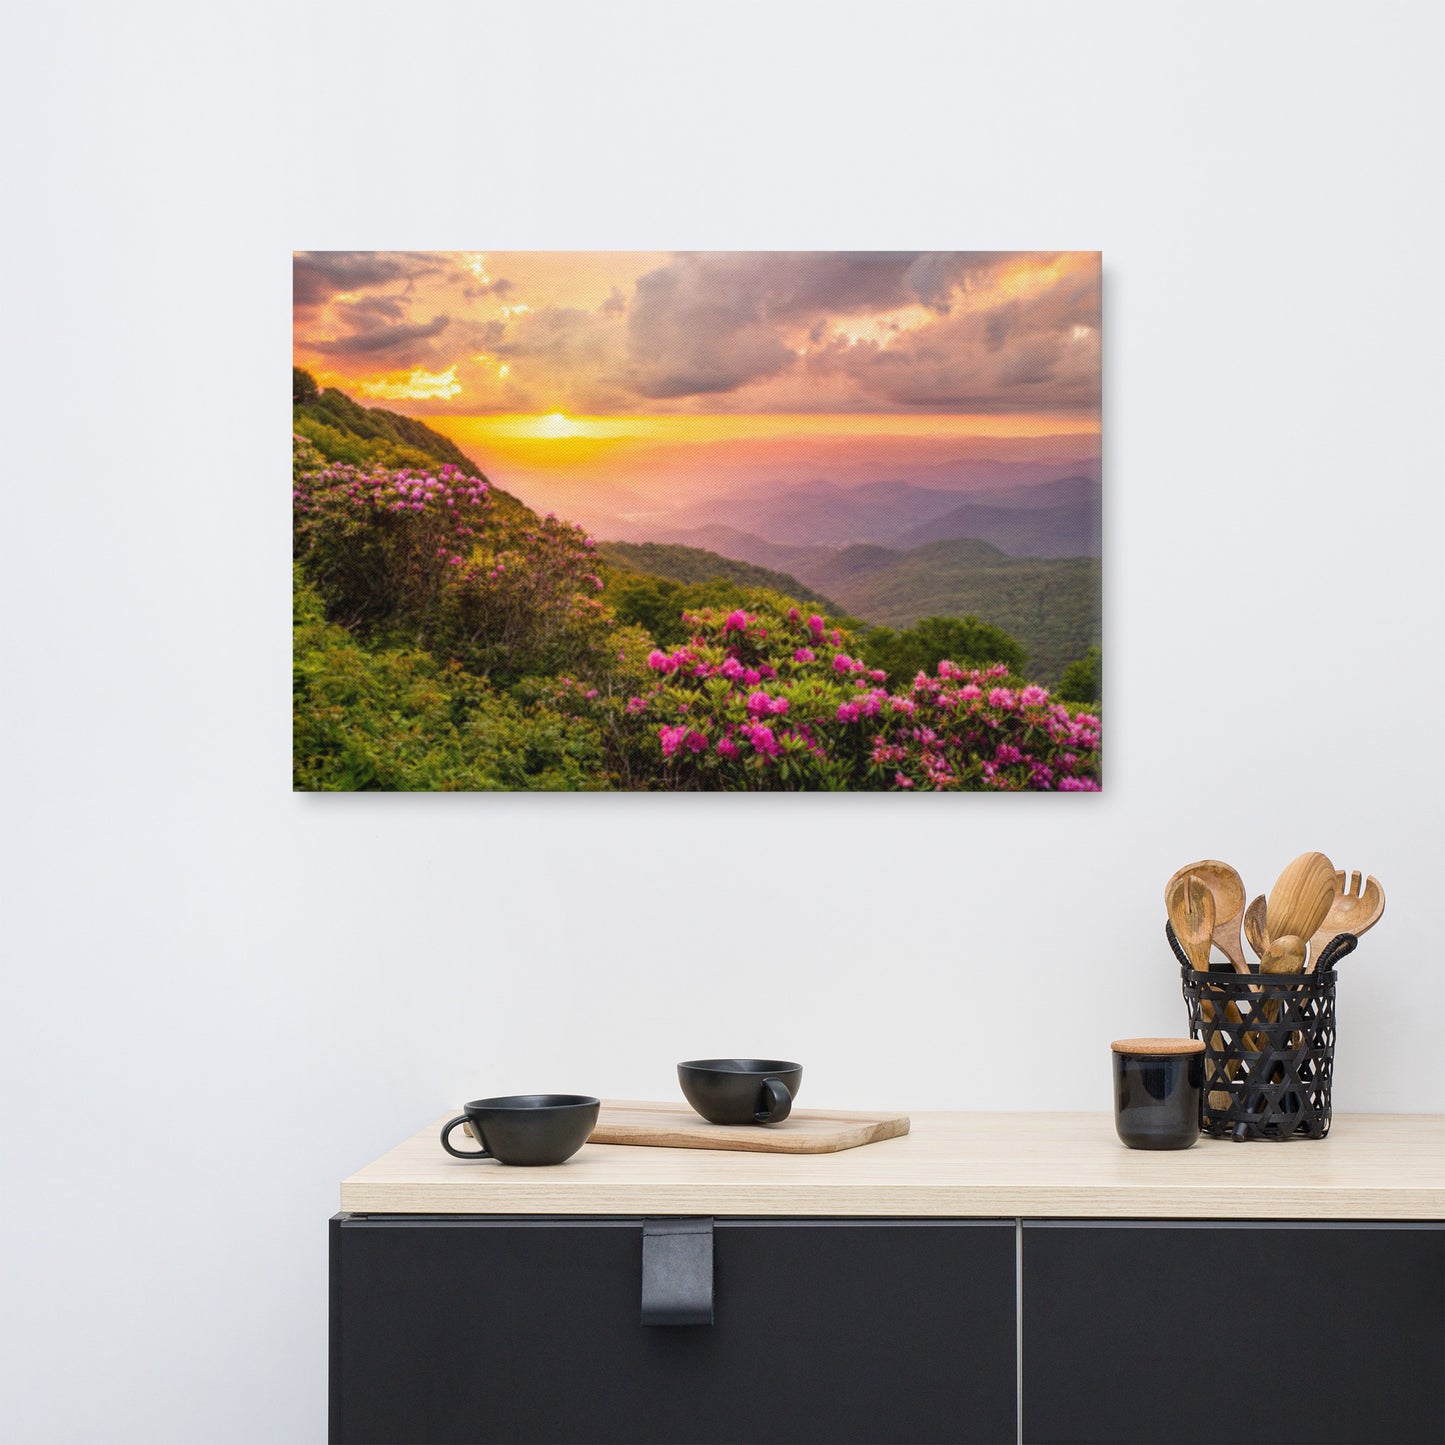 Matching Prints For Bedroom: Close of the Day - Appalachian Mountains Sunset - Floral / Botanical / Rustic Landscape Photograph Asheville North Carolina Blue Ridge Parkway